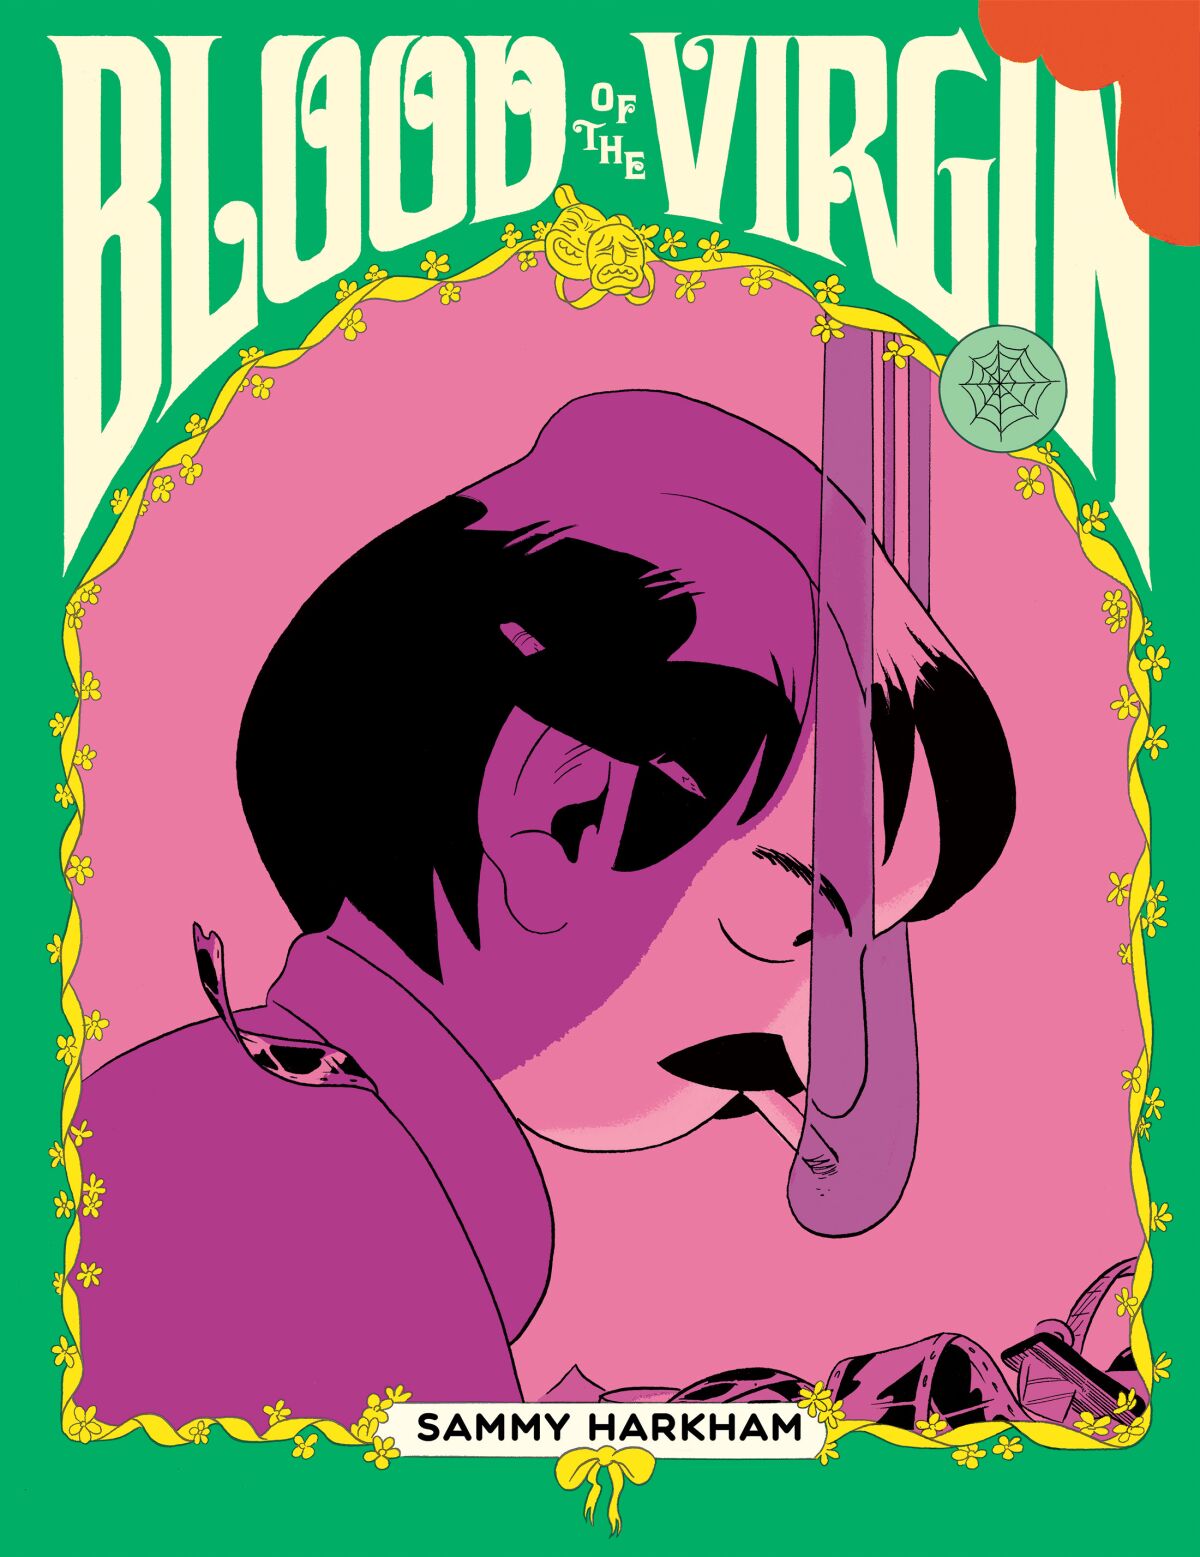 The graphic novel ‘Blood of the Virgin’ brings ’70s L.A., grindhouse movie biz to gory life